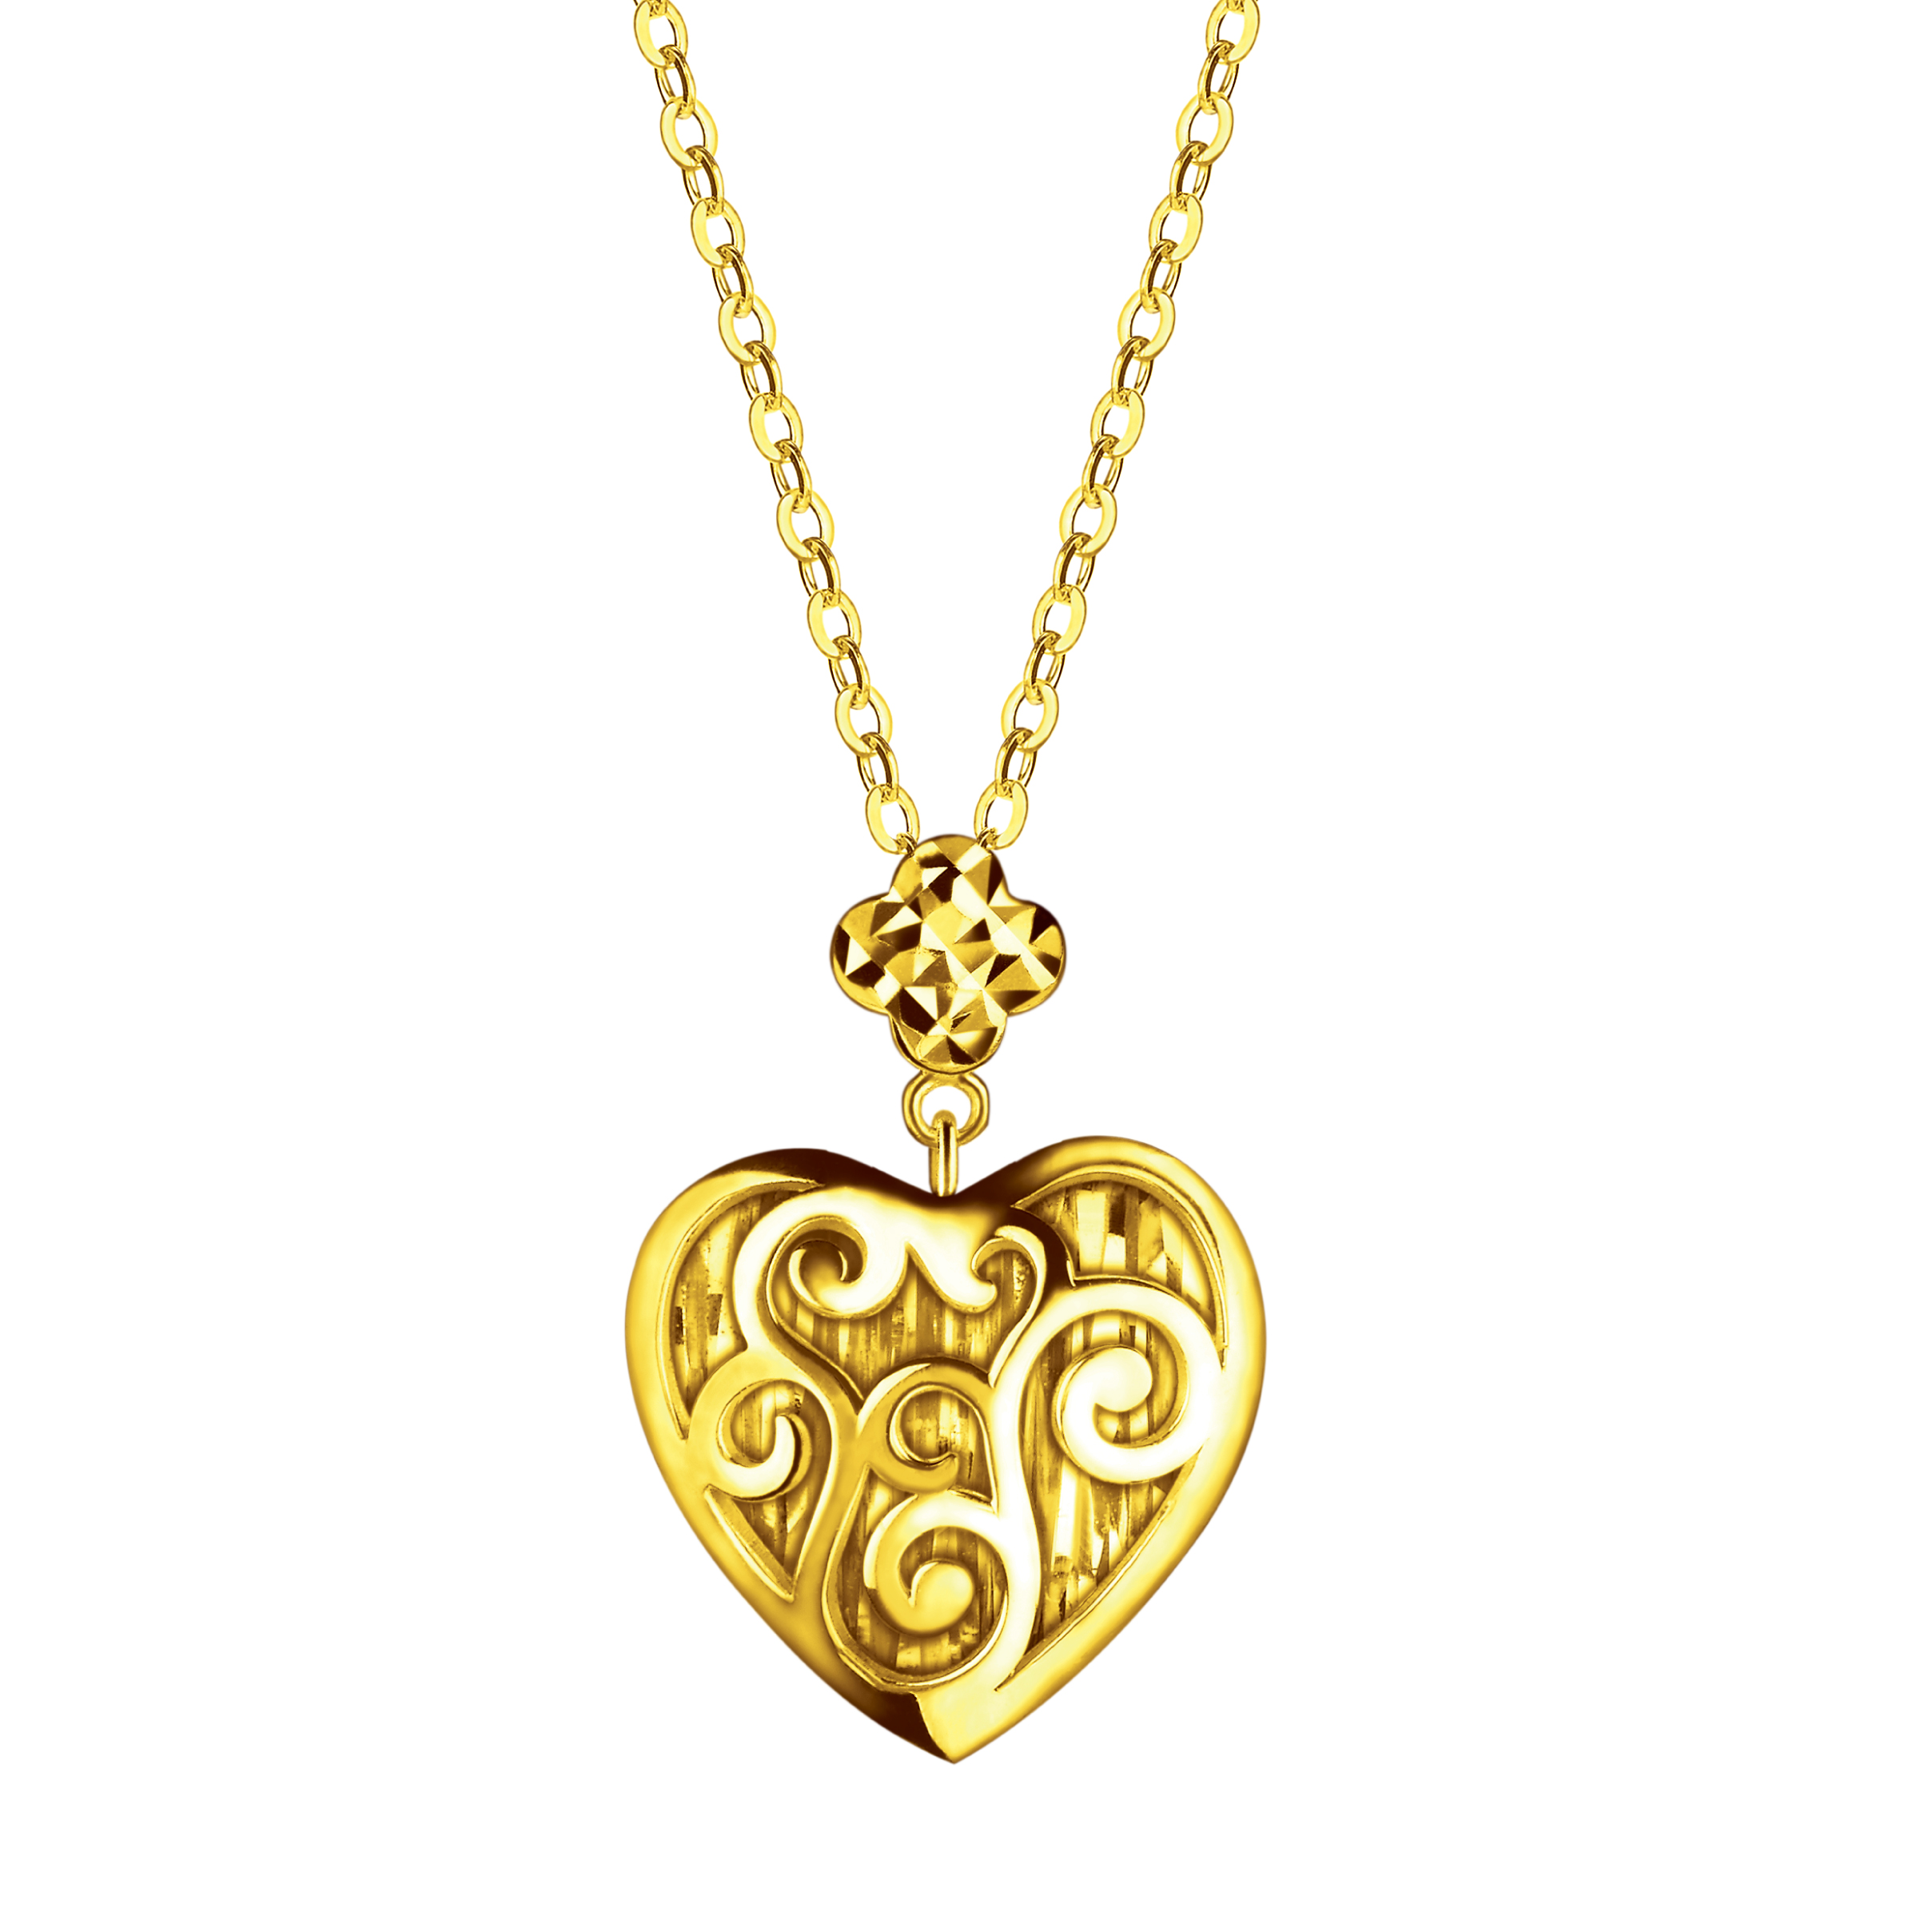 Goldstyle "Beating Heart" Gold Pendant